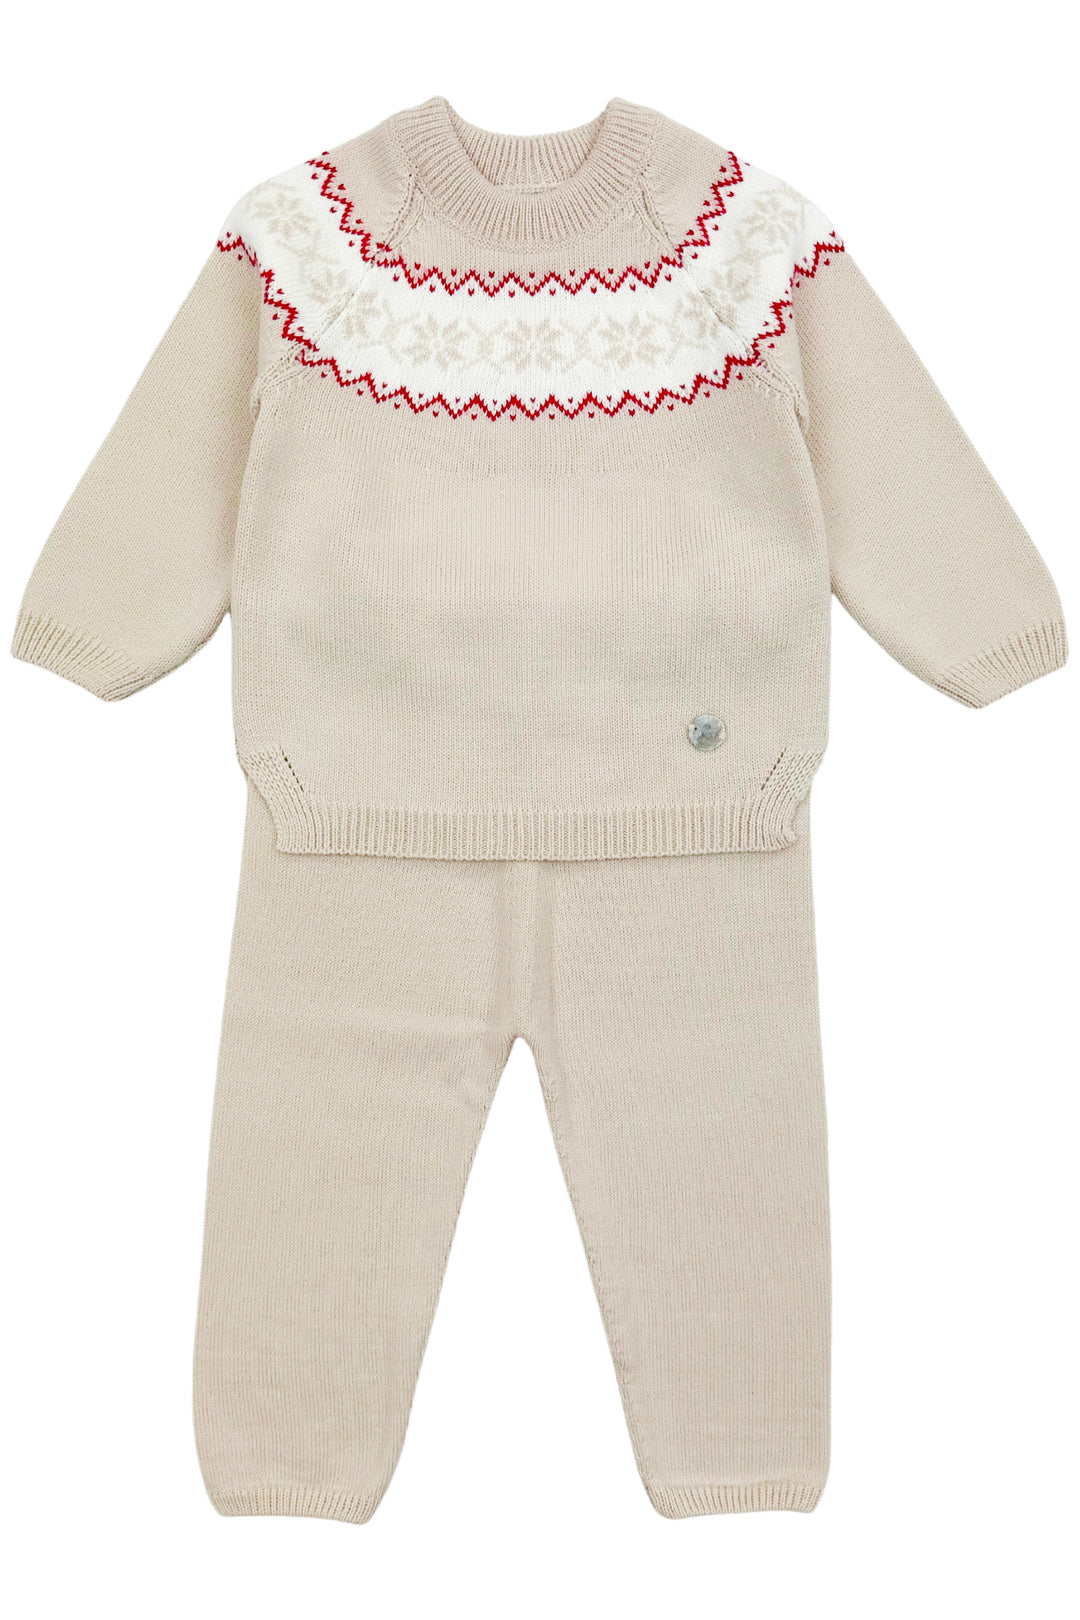 Granlei "Silas" Stone Knitted Tracksuit | Millie and John